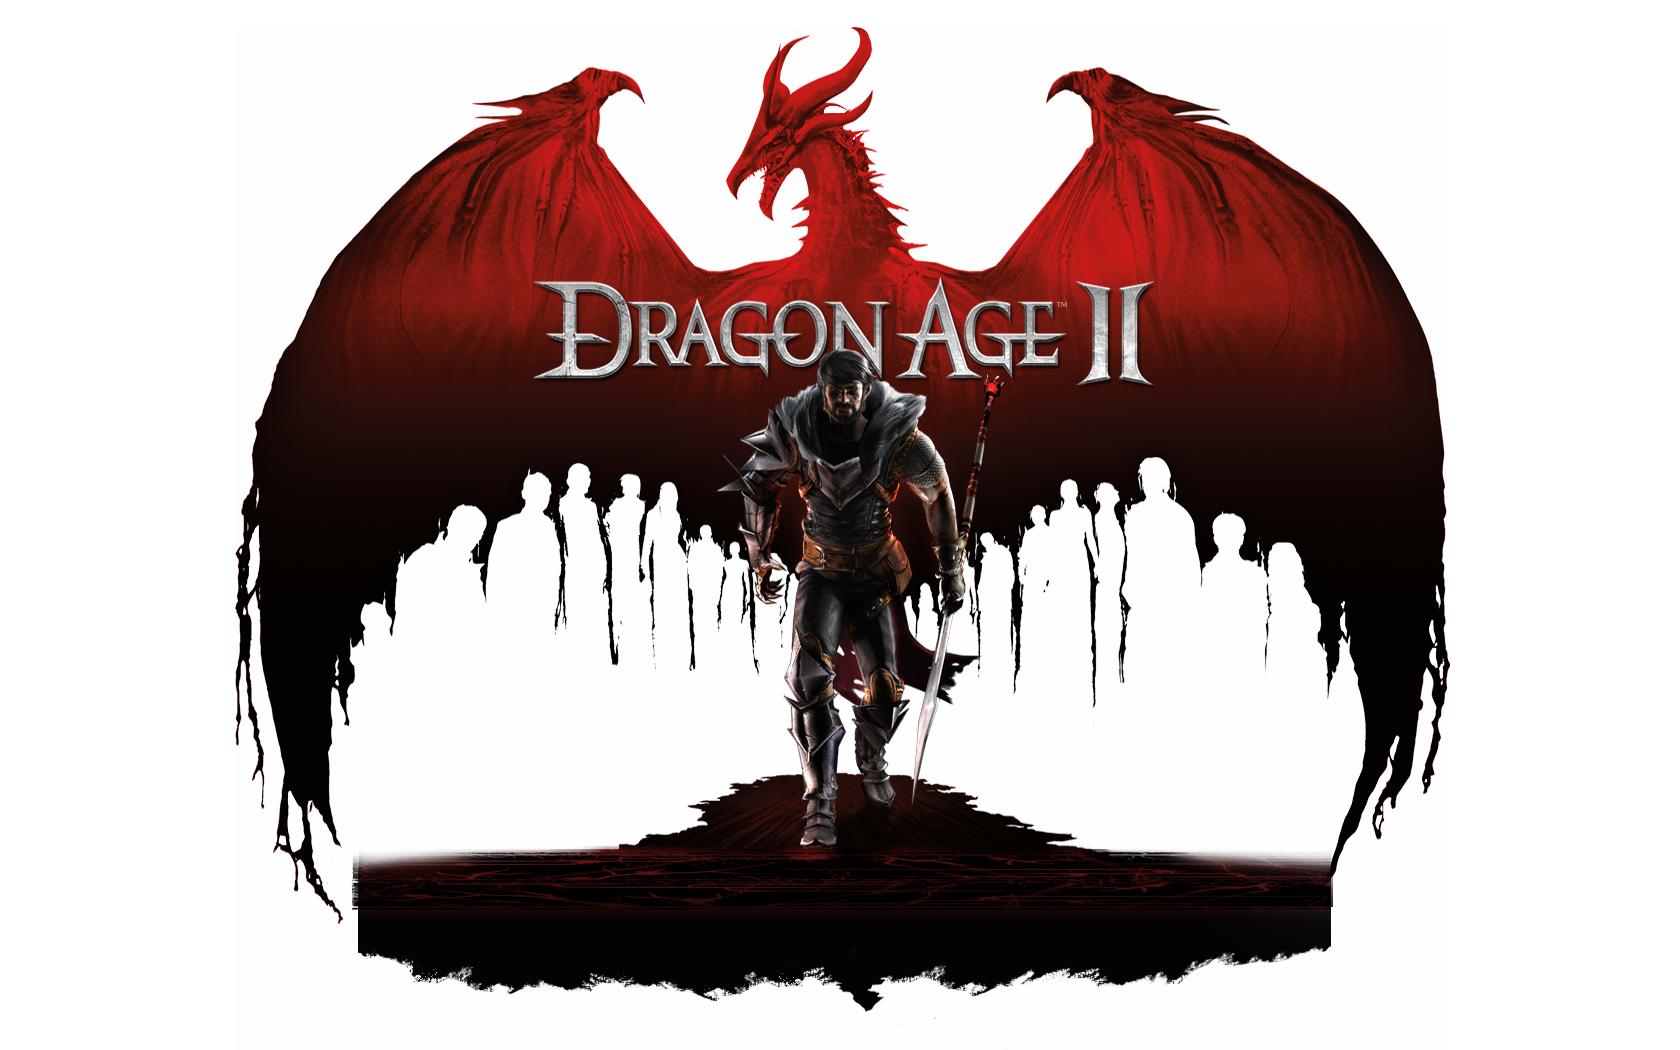 To The Dragon Age Wallpaper Click On Image Below Or